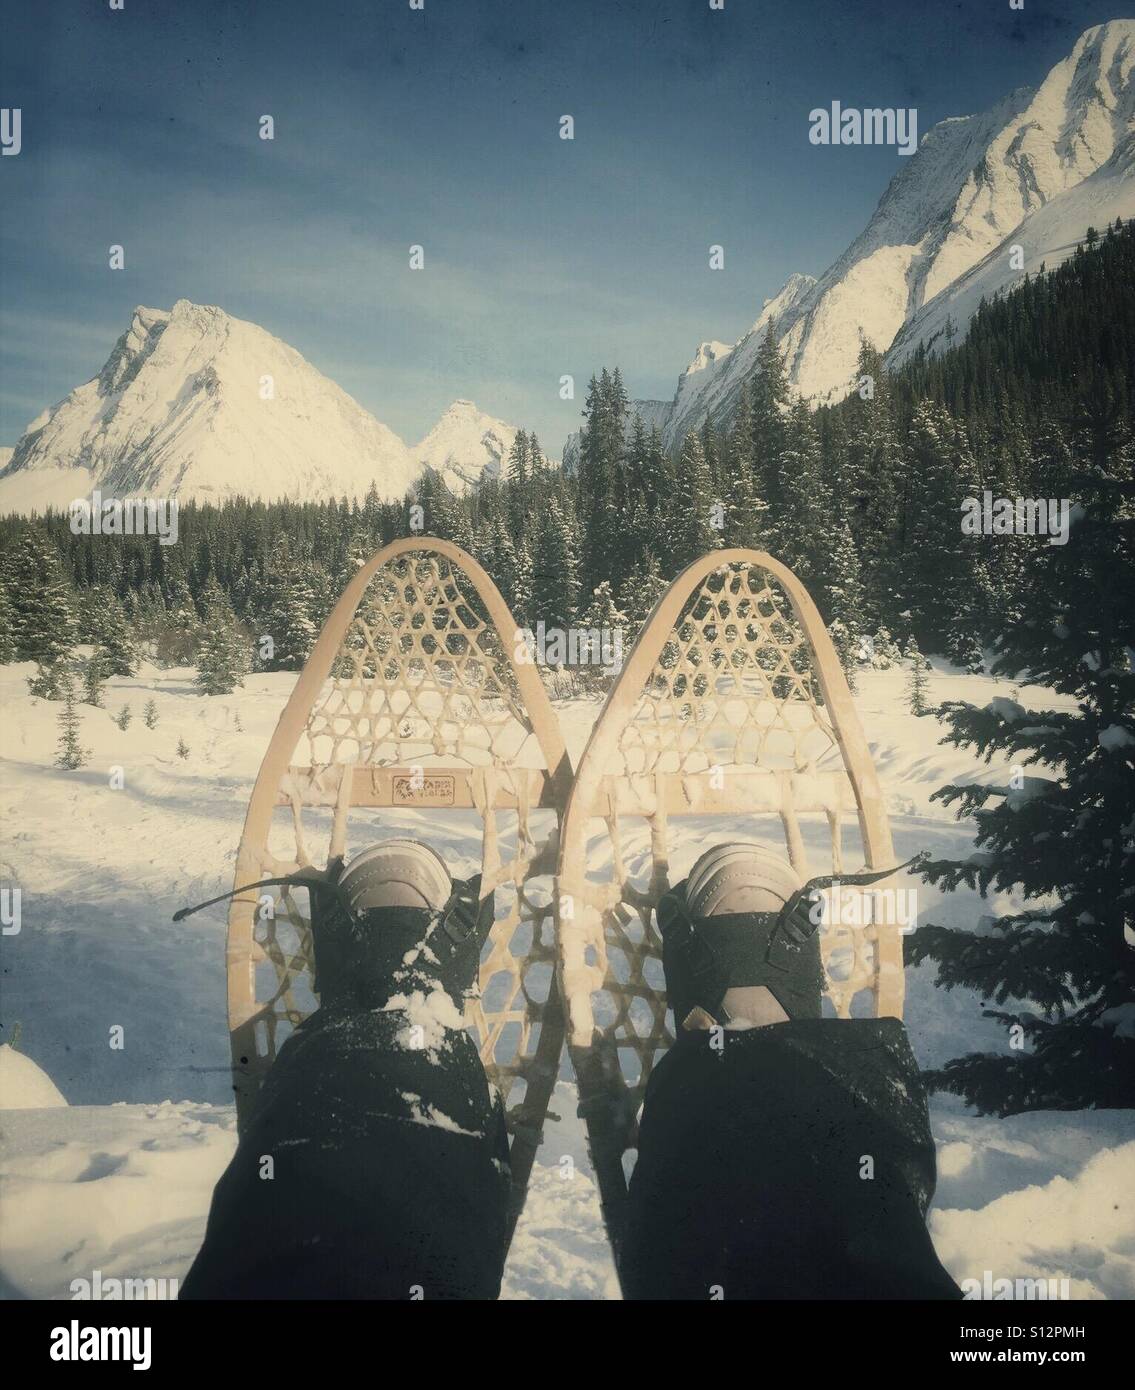 Snowshoes against a winter mountain scene. Stock Photo